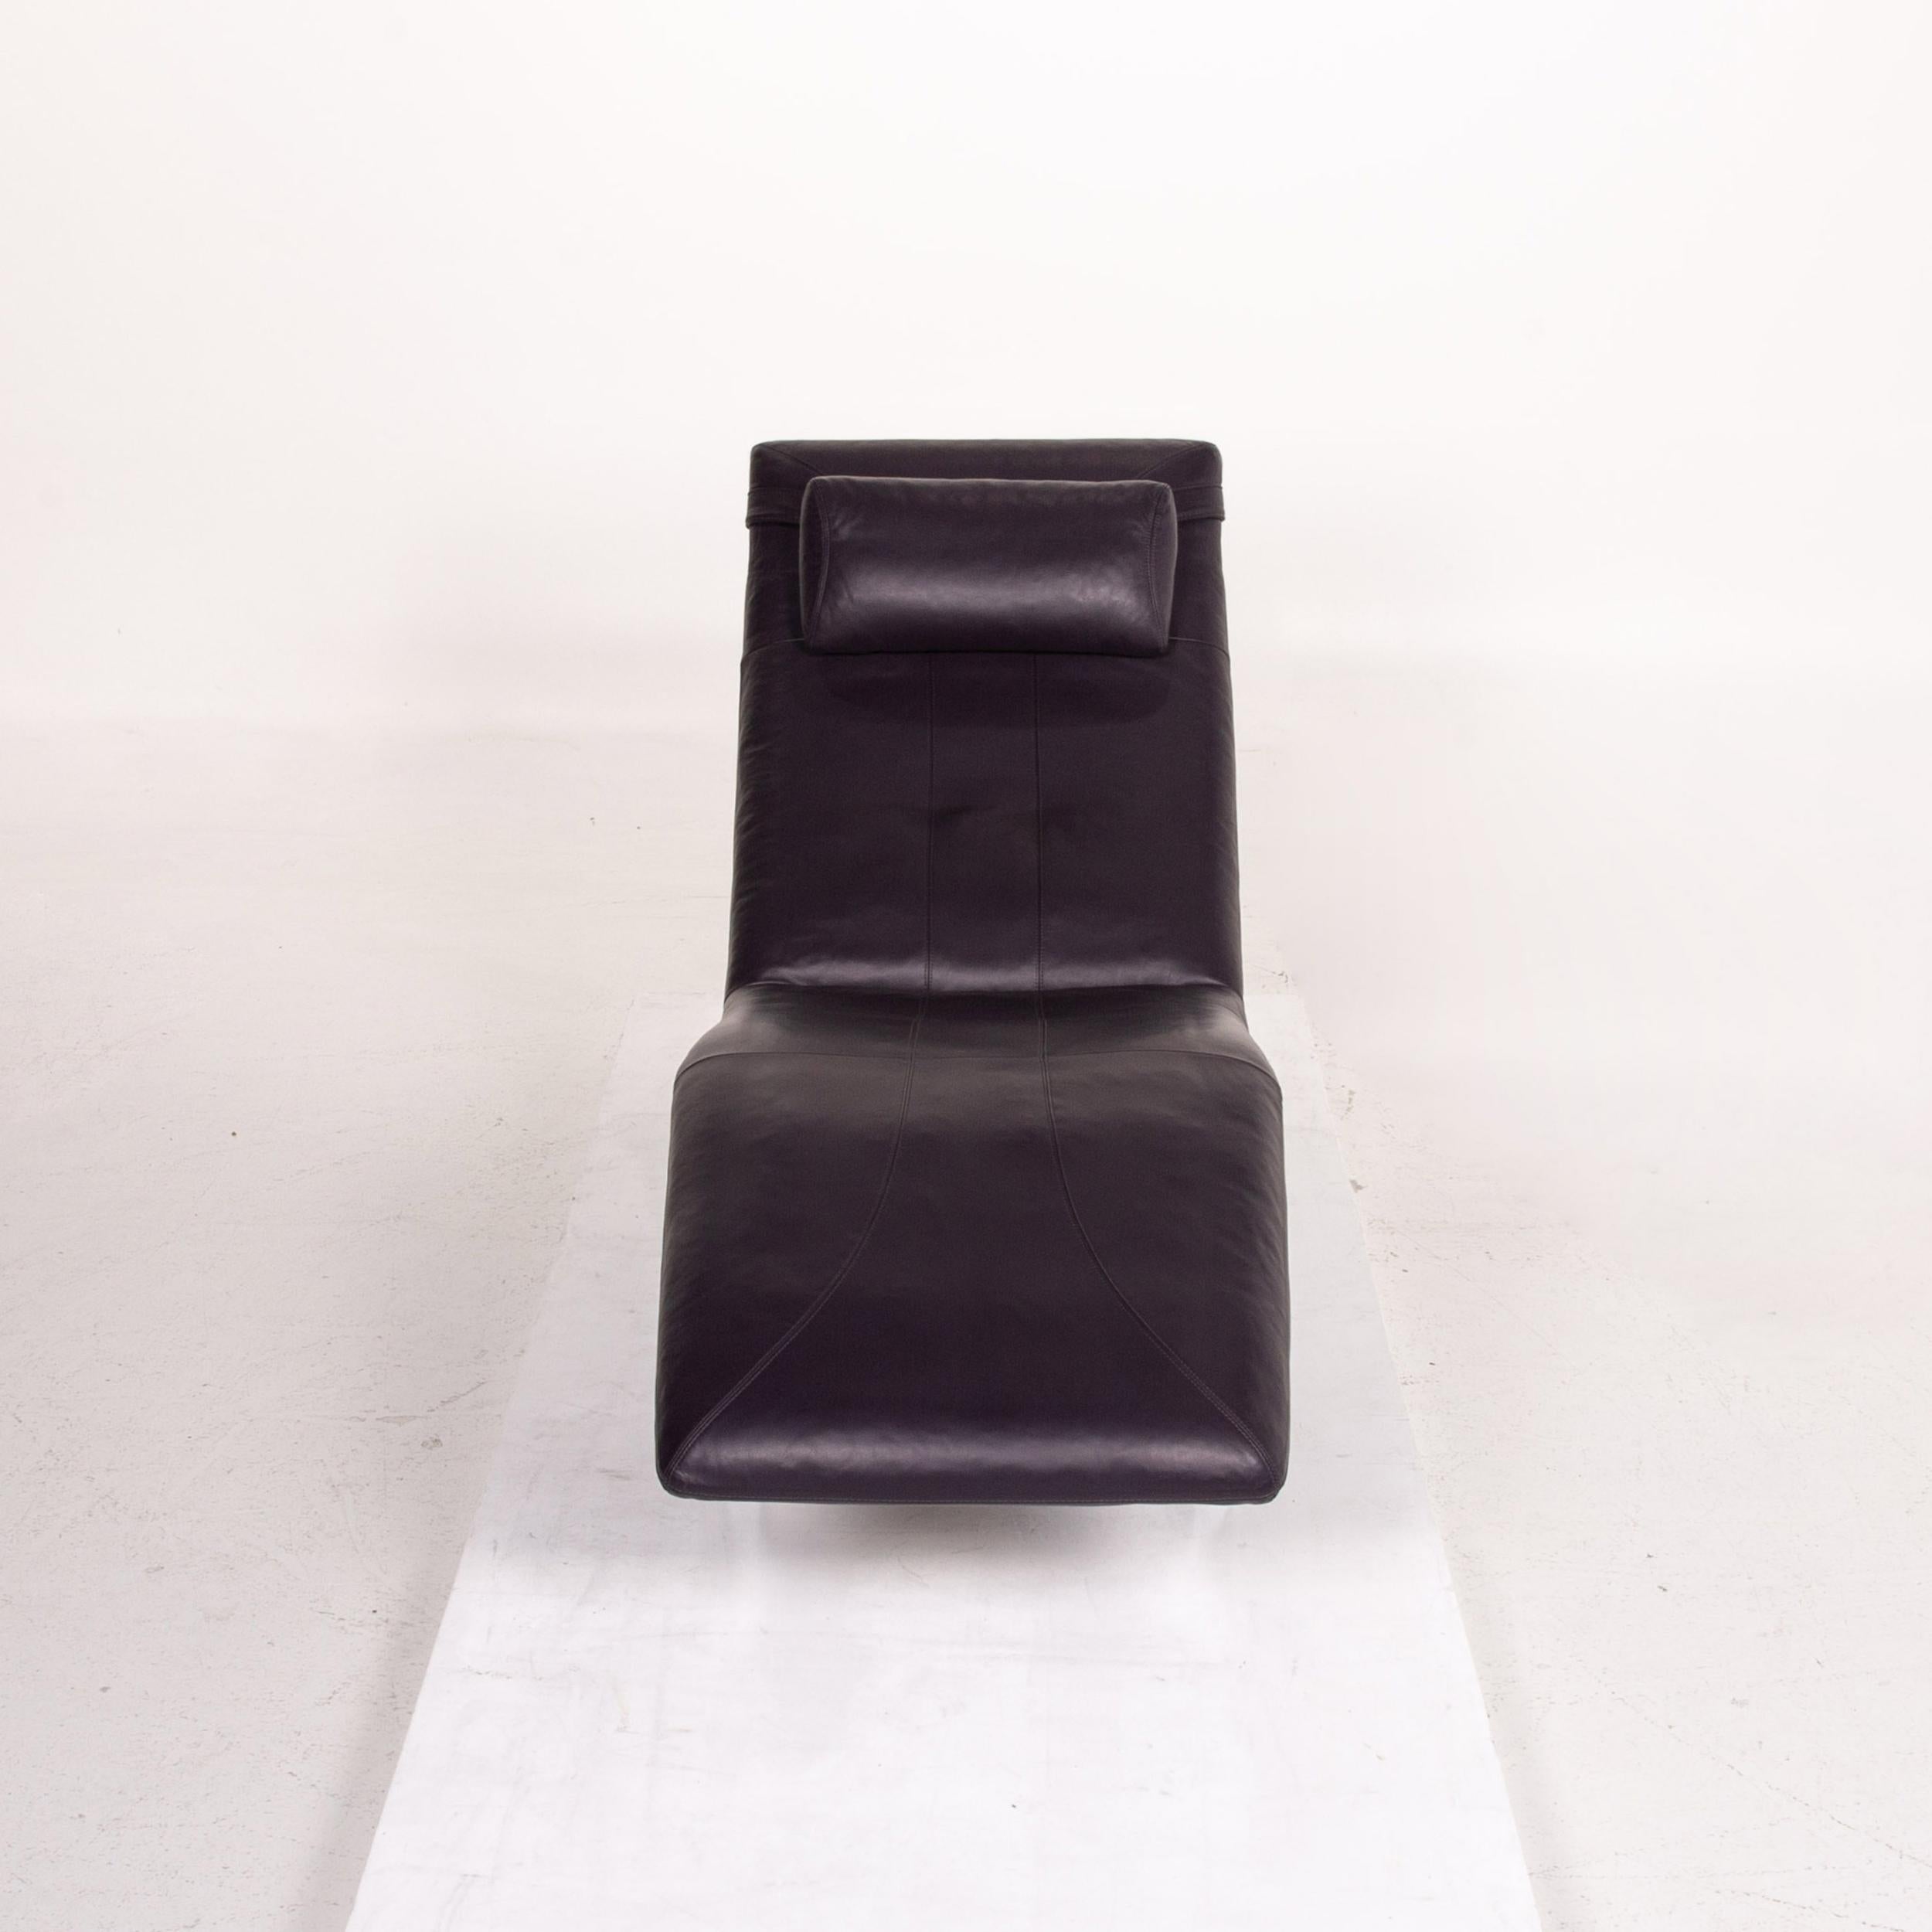 Contemporary Rolf Benz Leather Lounger Violet Relax Lounger